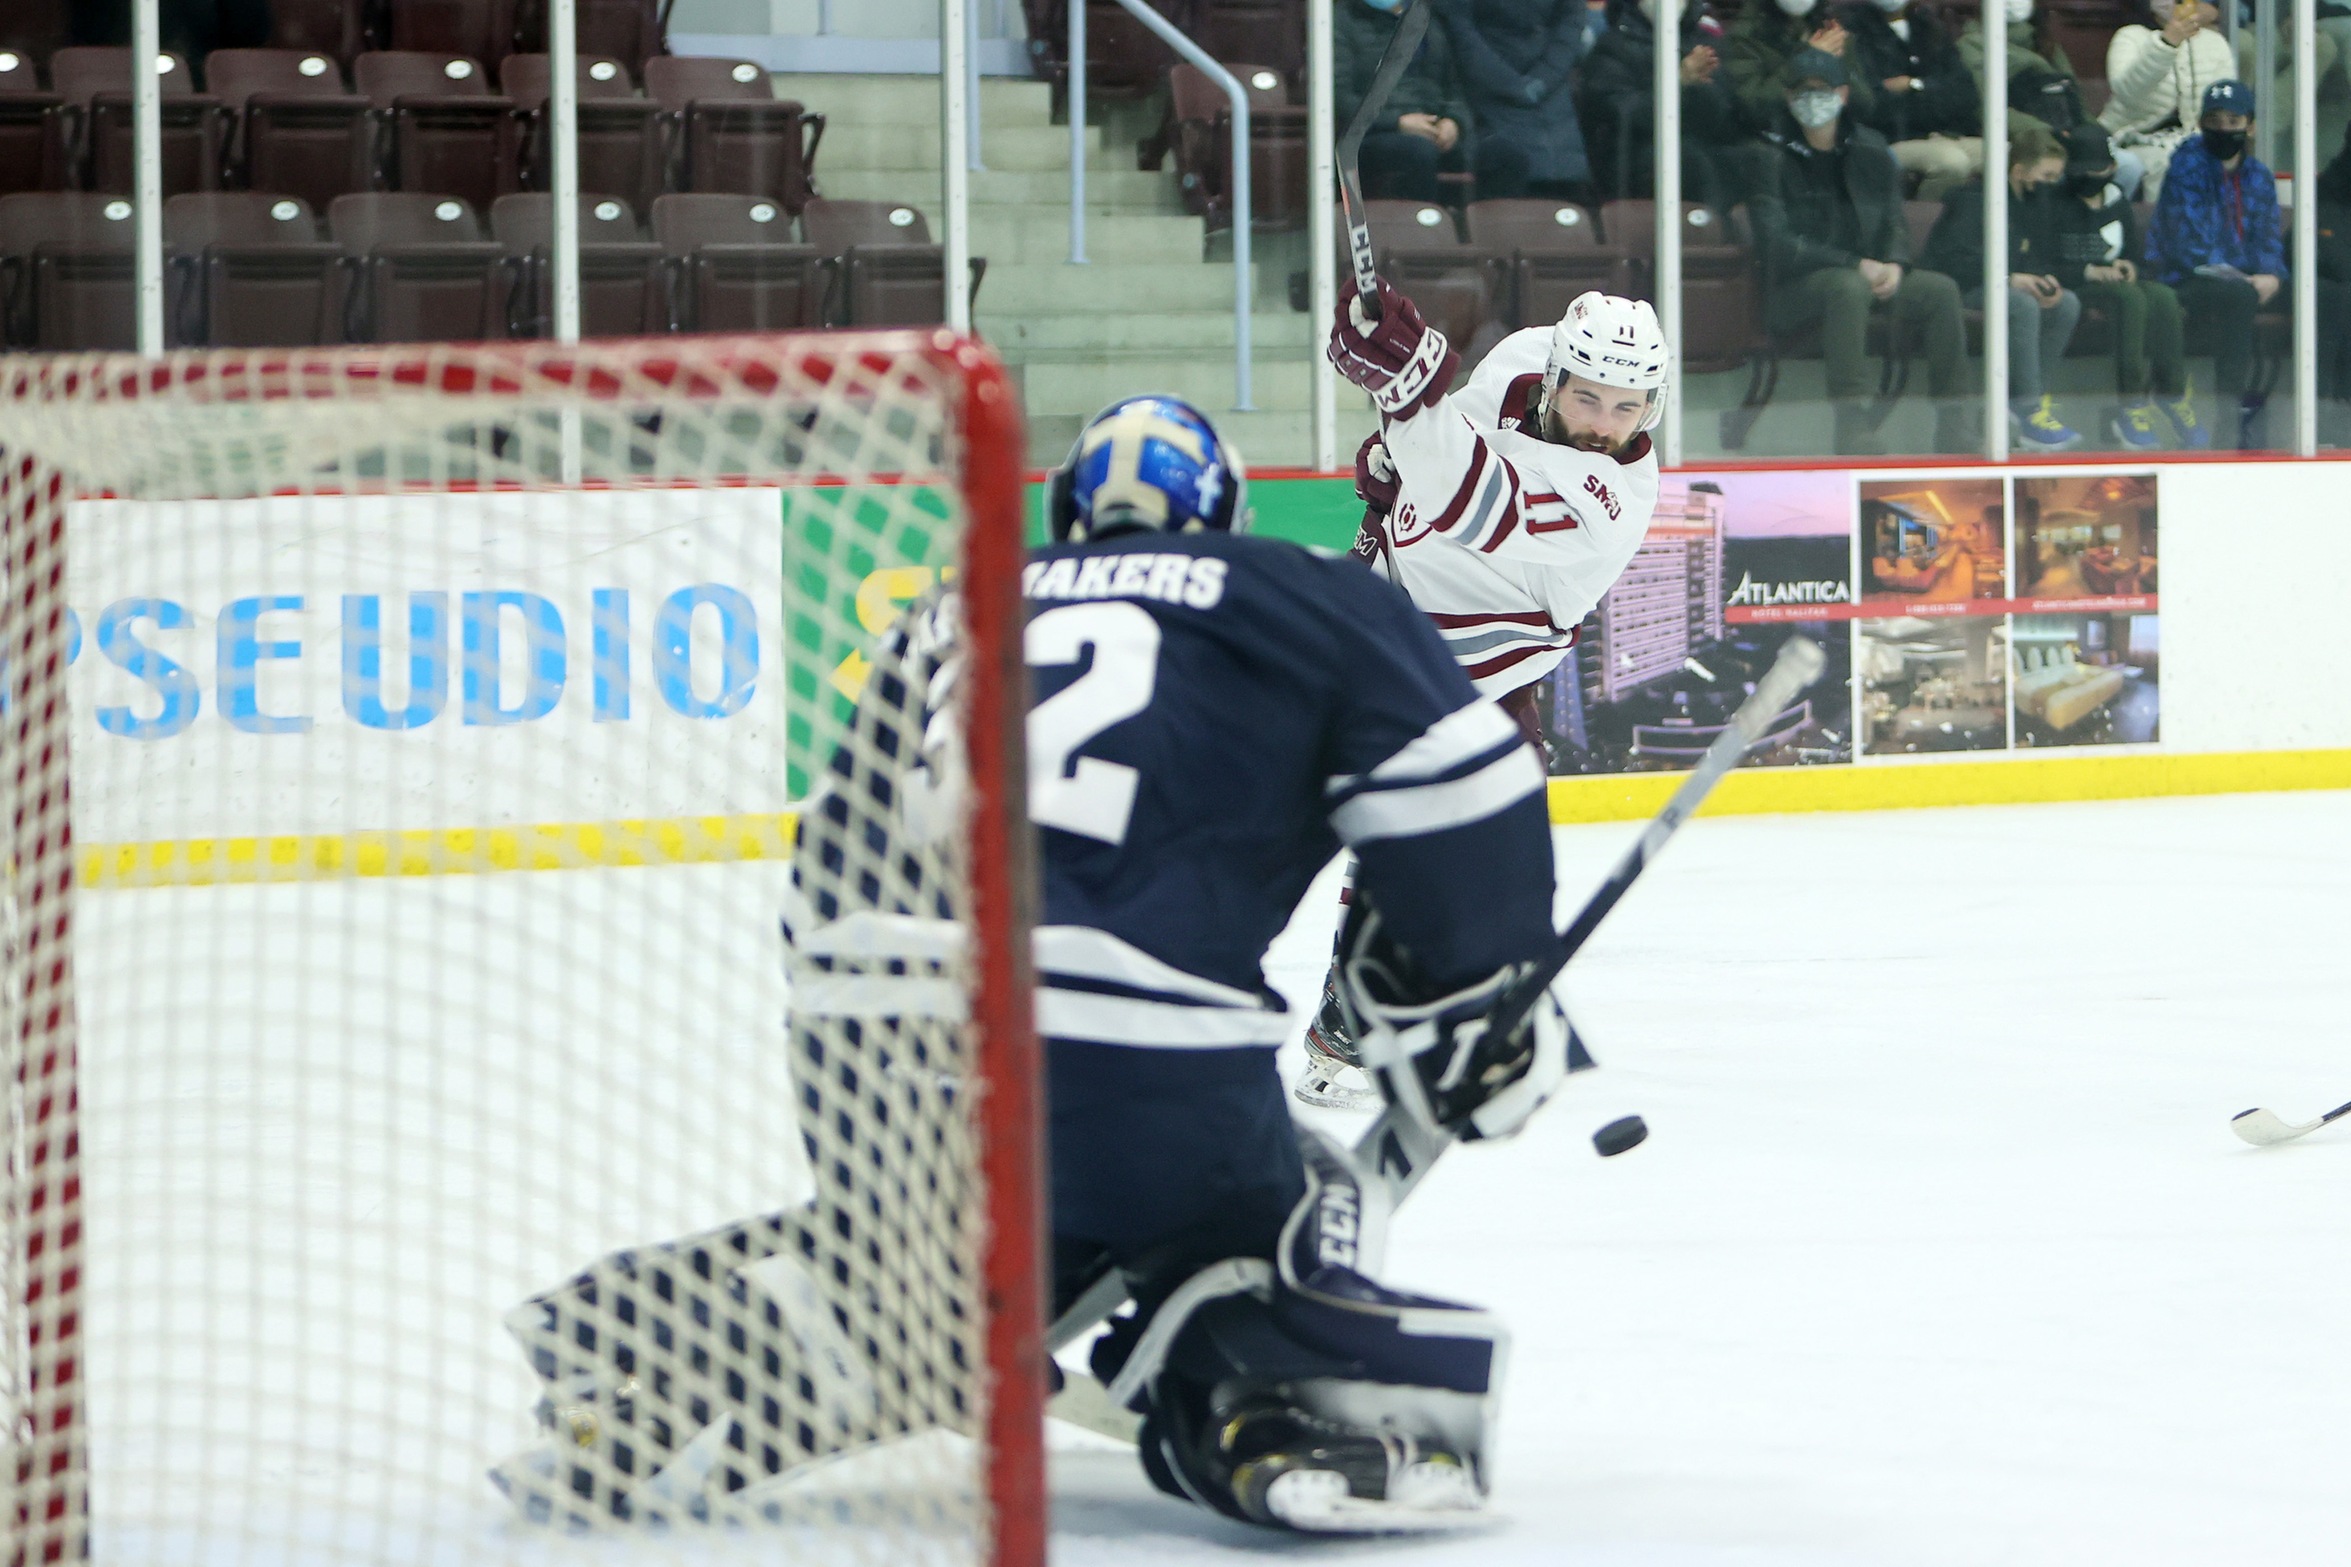 Saint Mary's forward Sam King fires a shot at St. FX X-Men goaltender Joseph Raaymakers during the X-Men 3-2 overtime win in game two of the AUS semi-finals, March 20, 2022 at the Dauphinee Centre in Halifax.